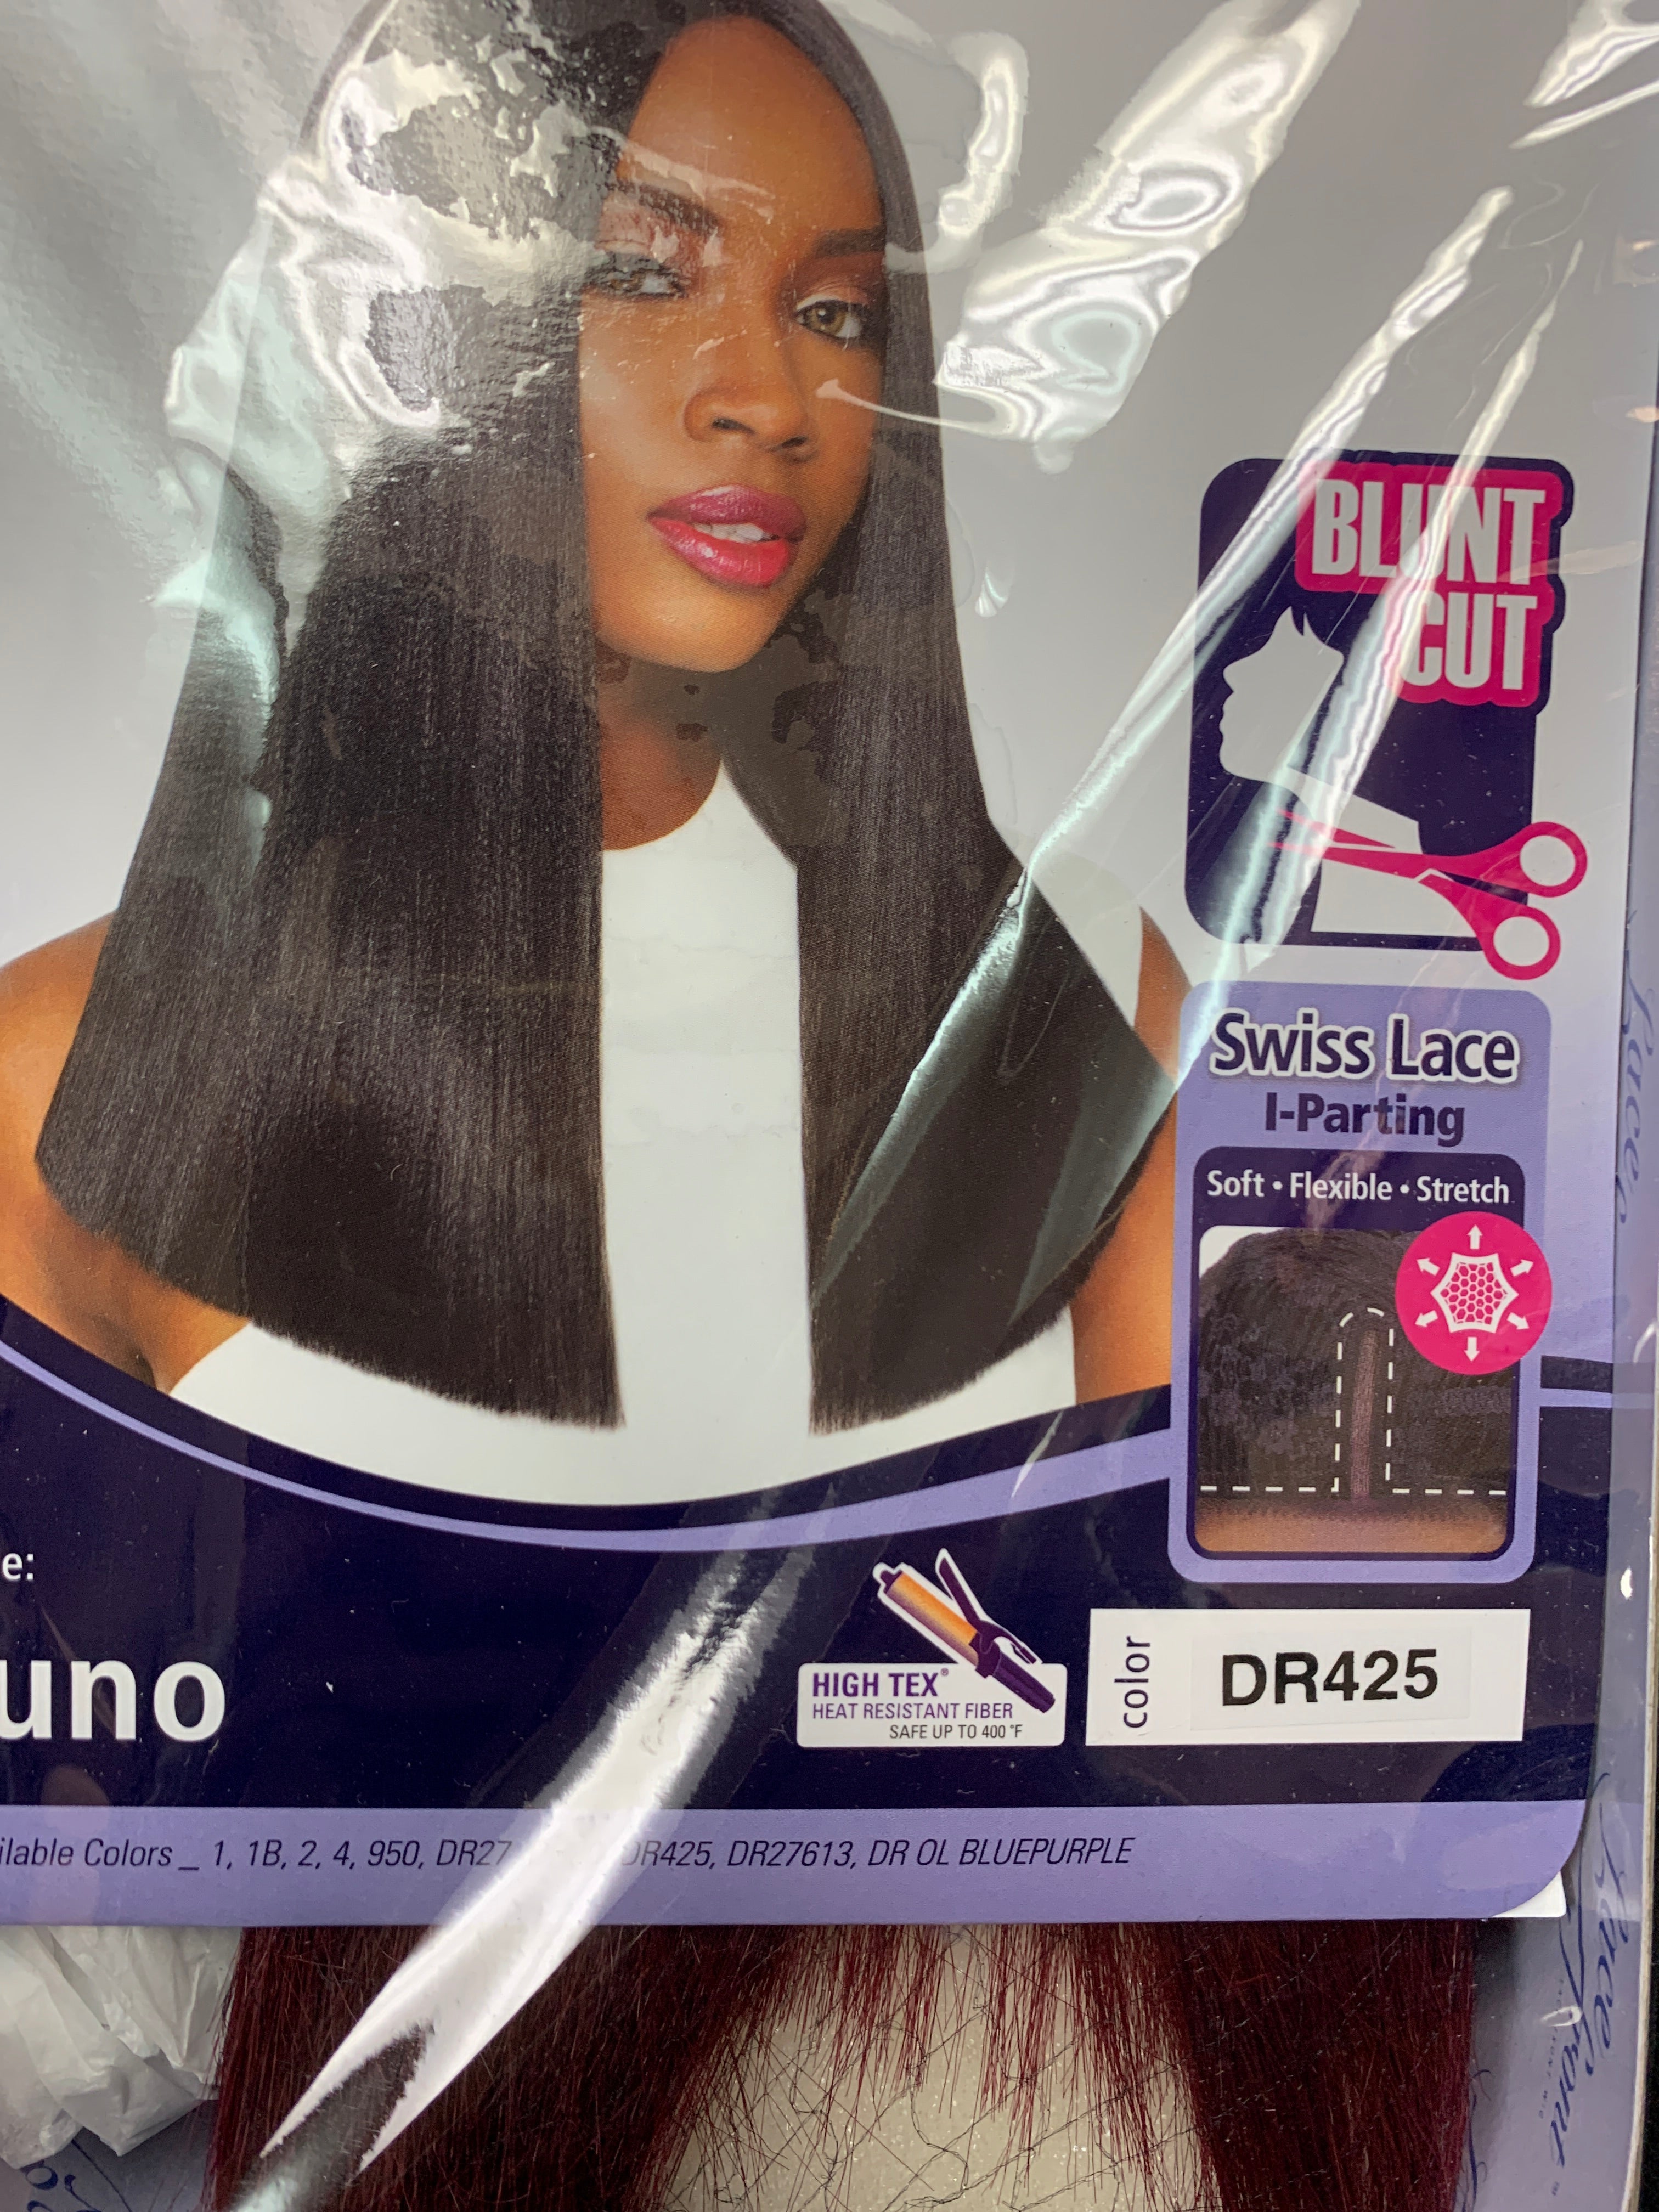 Outre lace front Juno